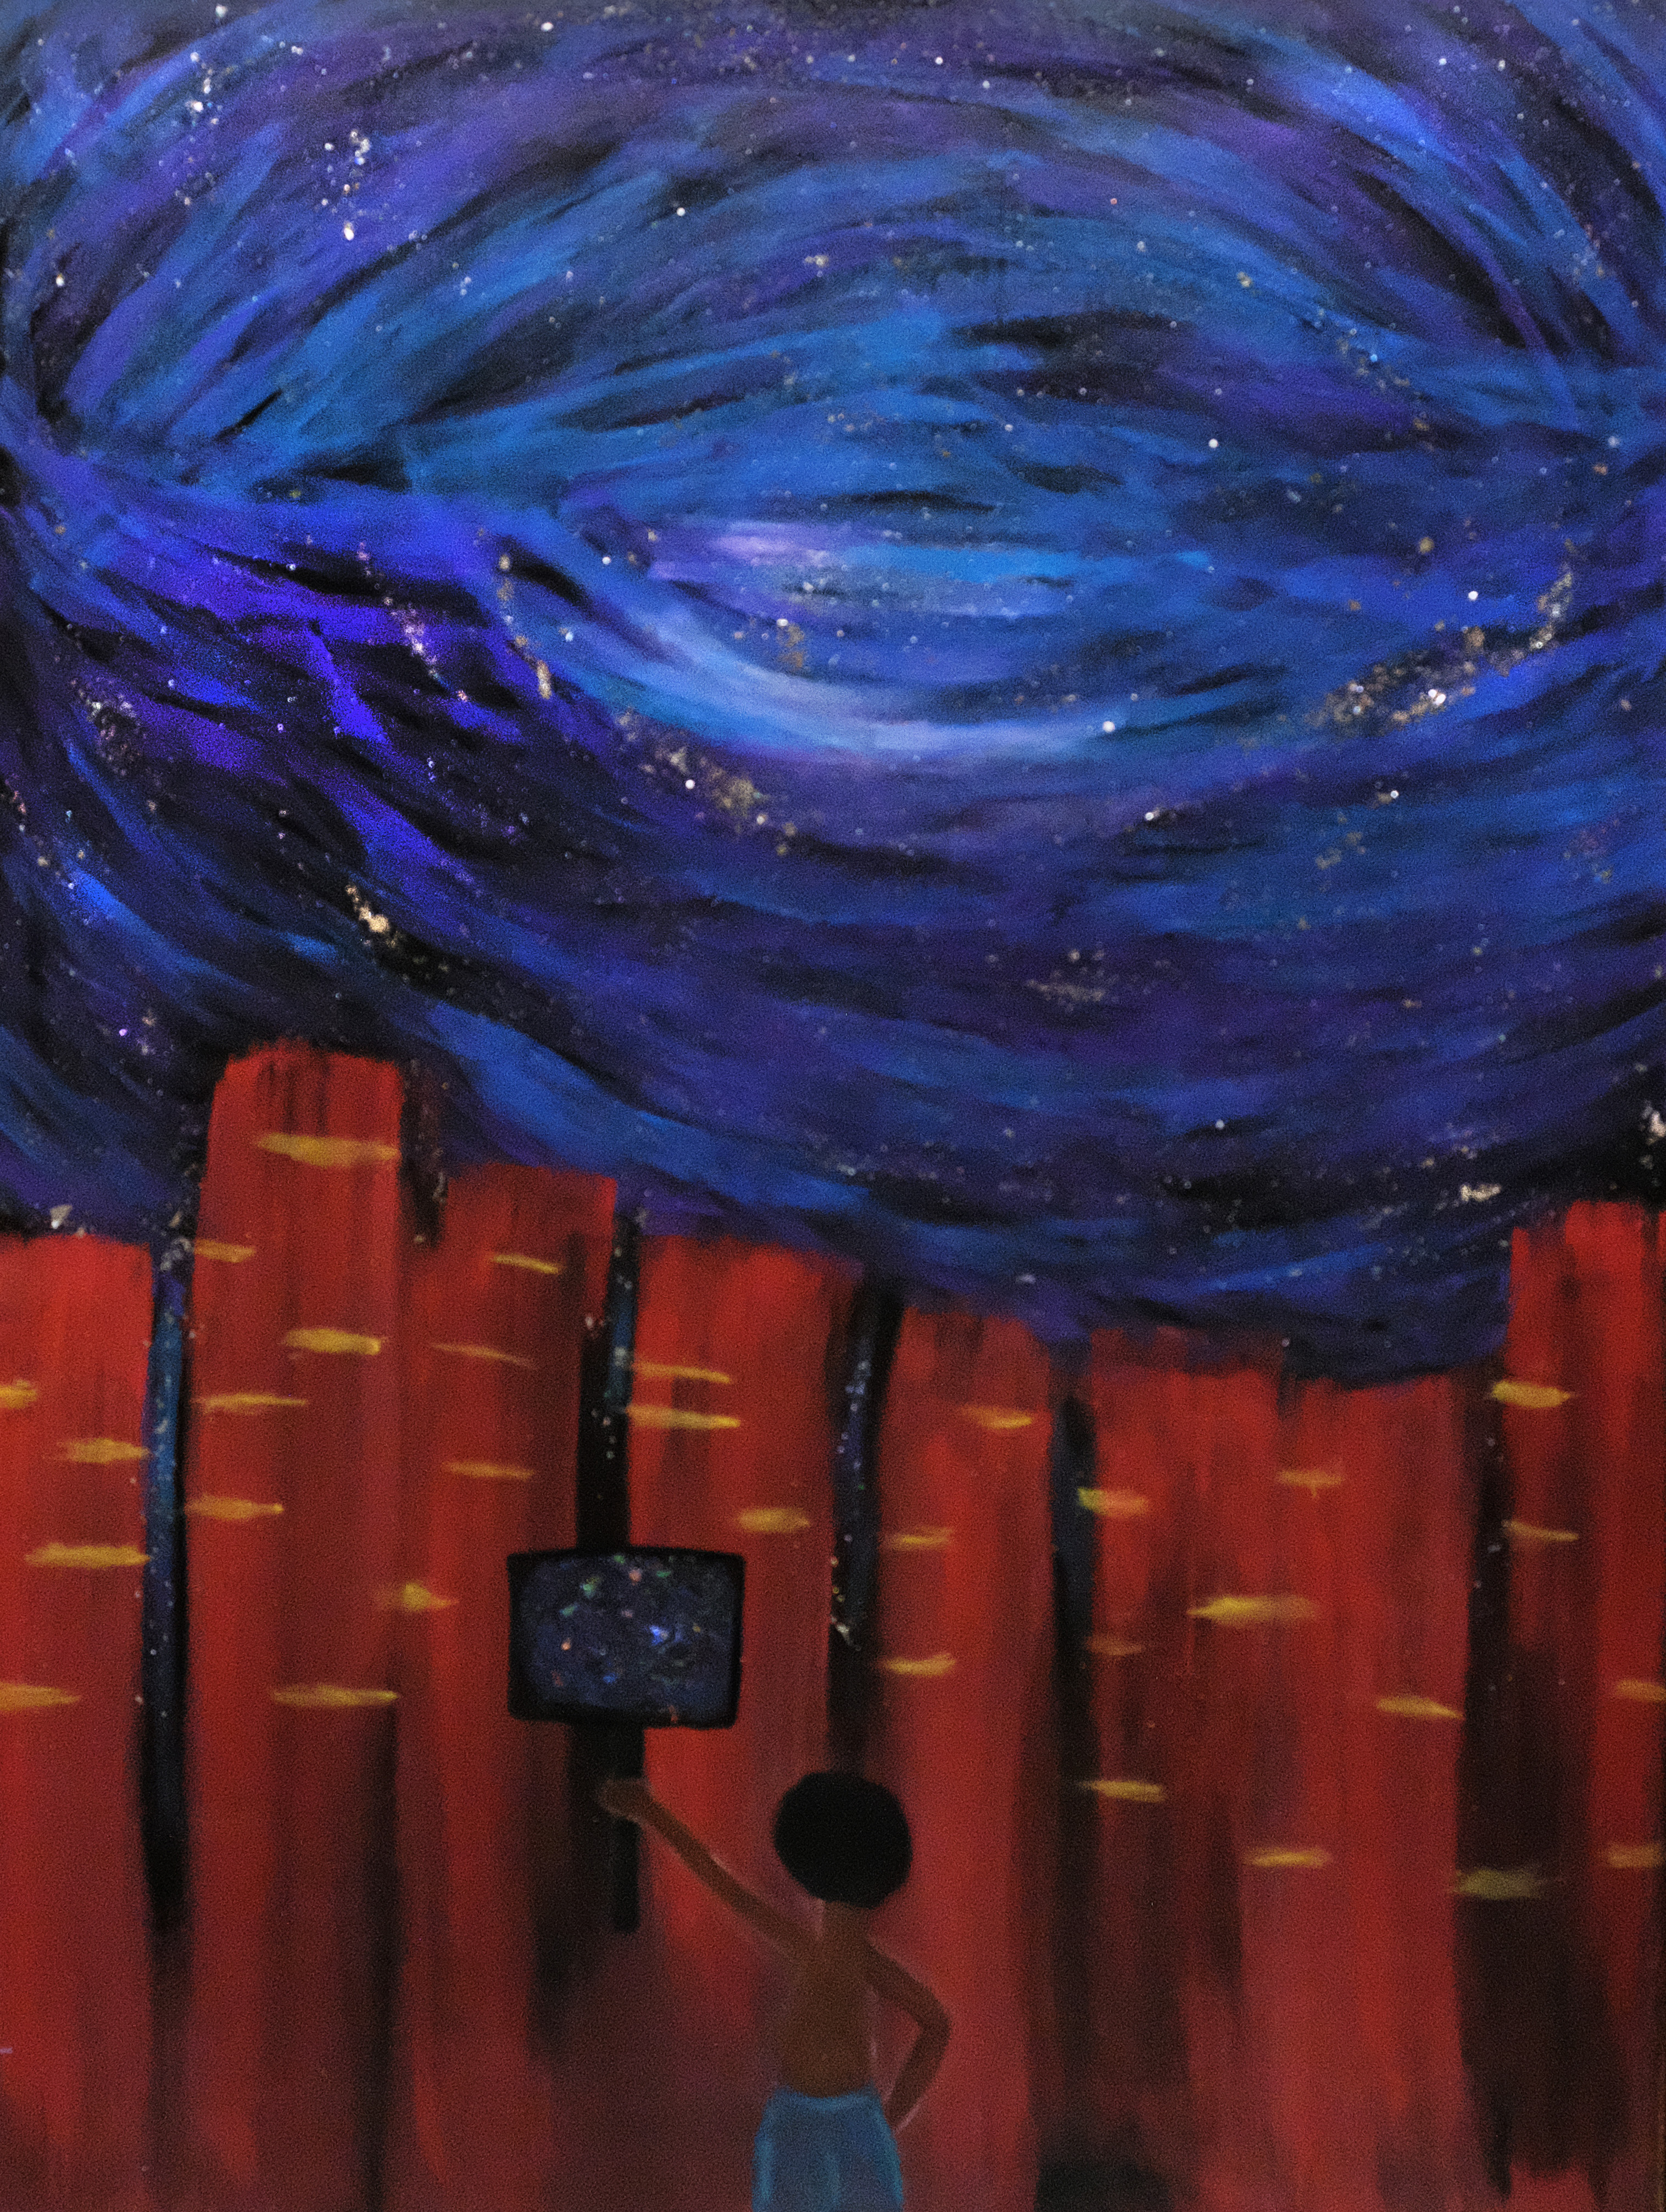 A painting: a short person holds a protest sign as they stand in front of a fence. Above the fence is a starry night sky.